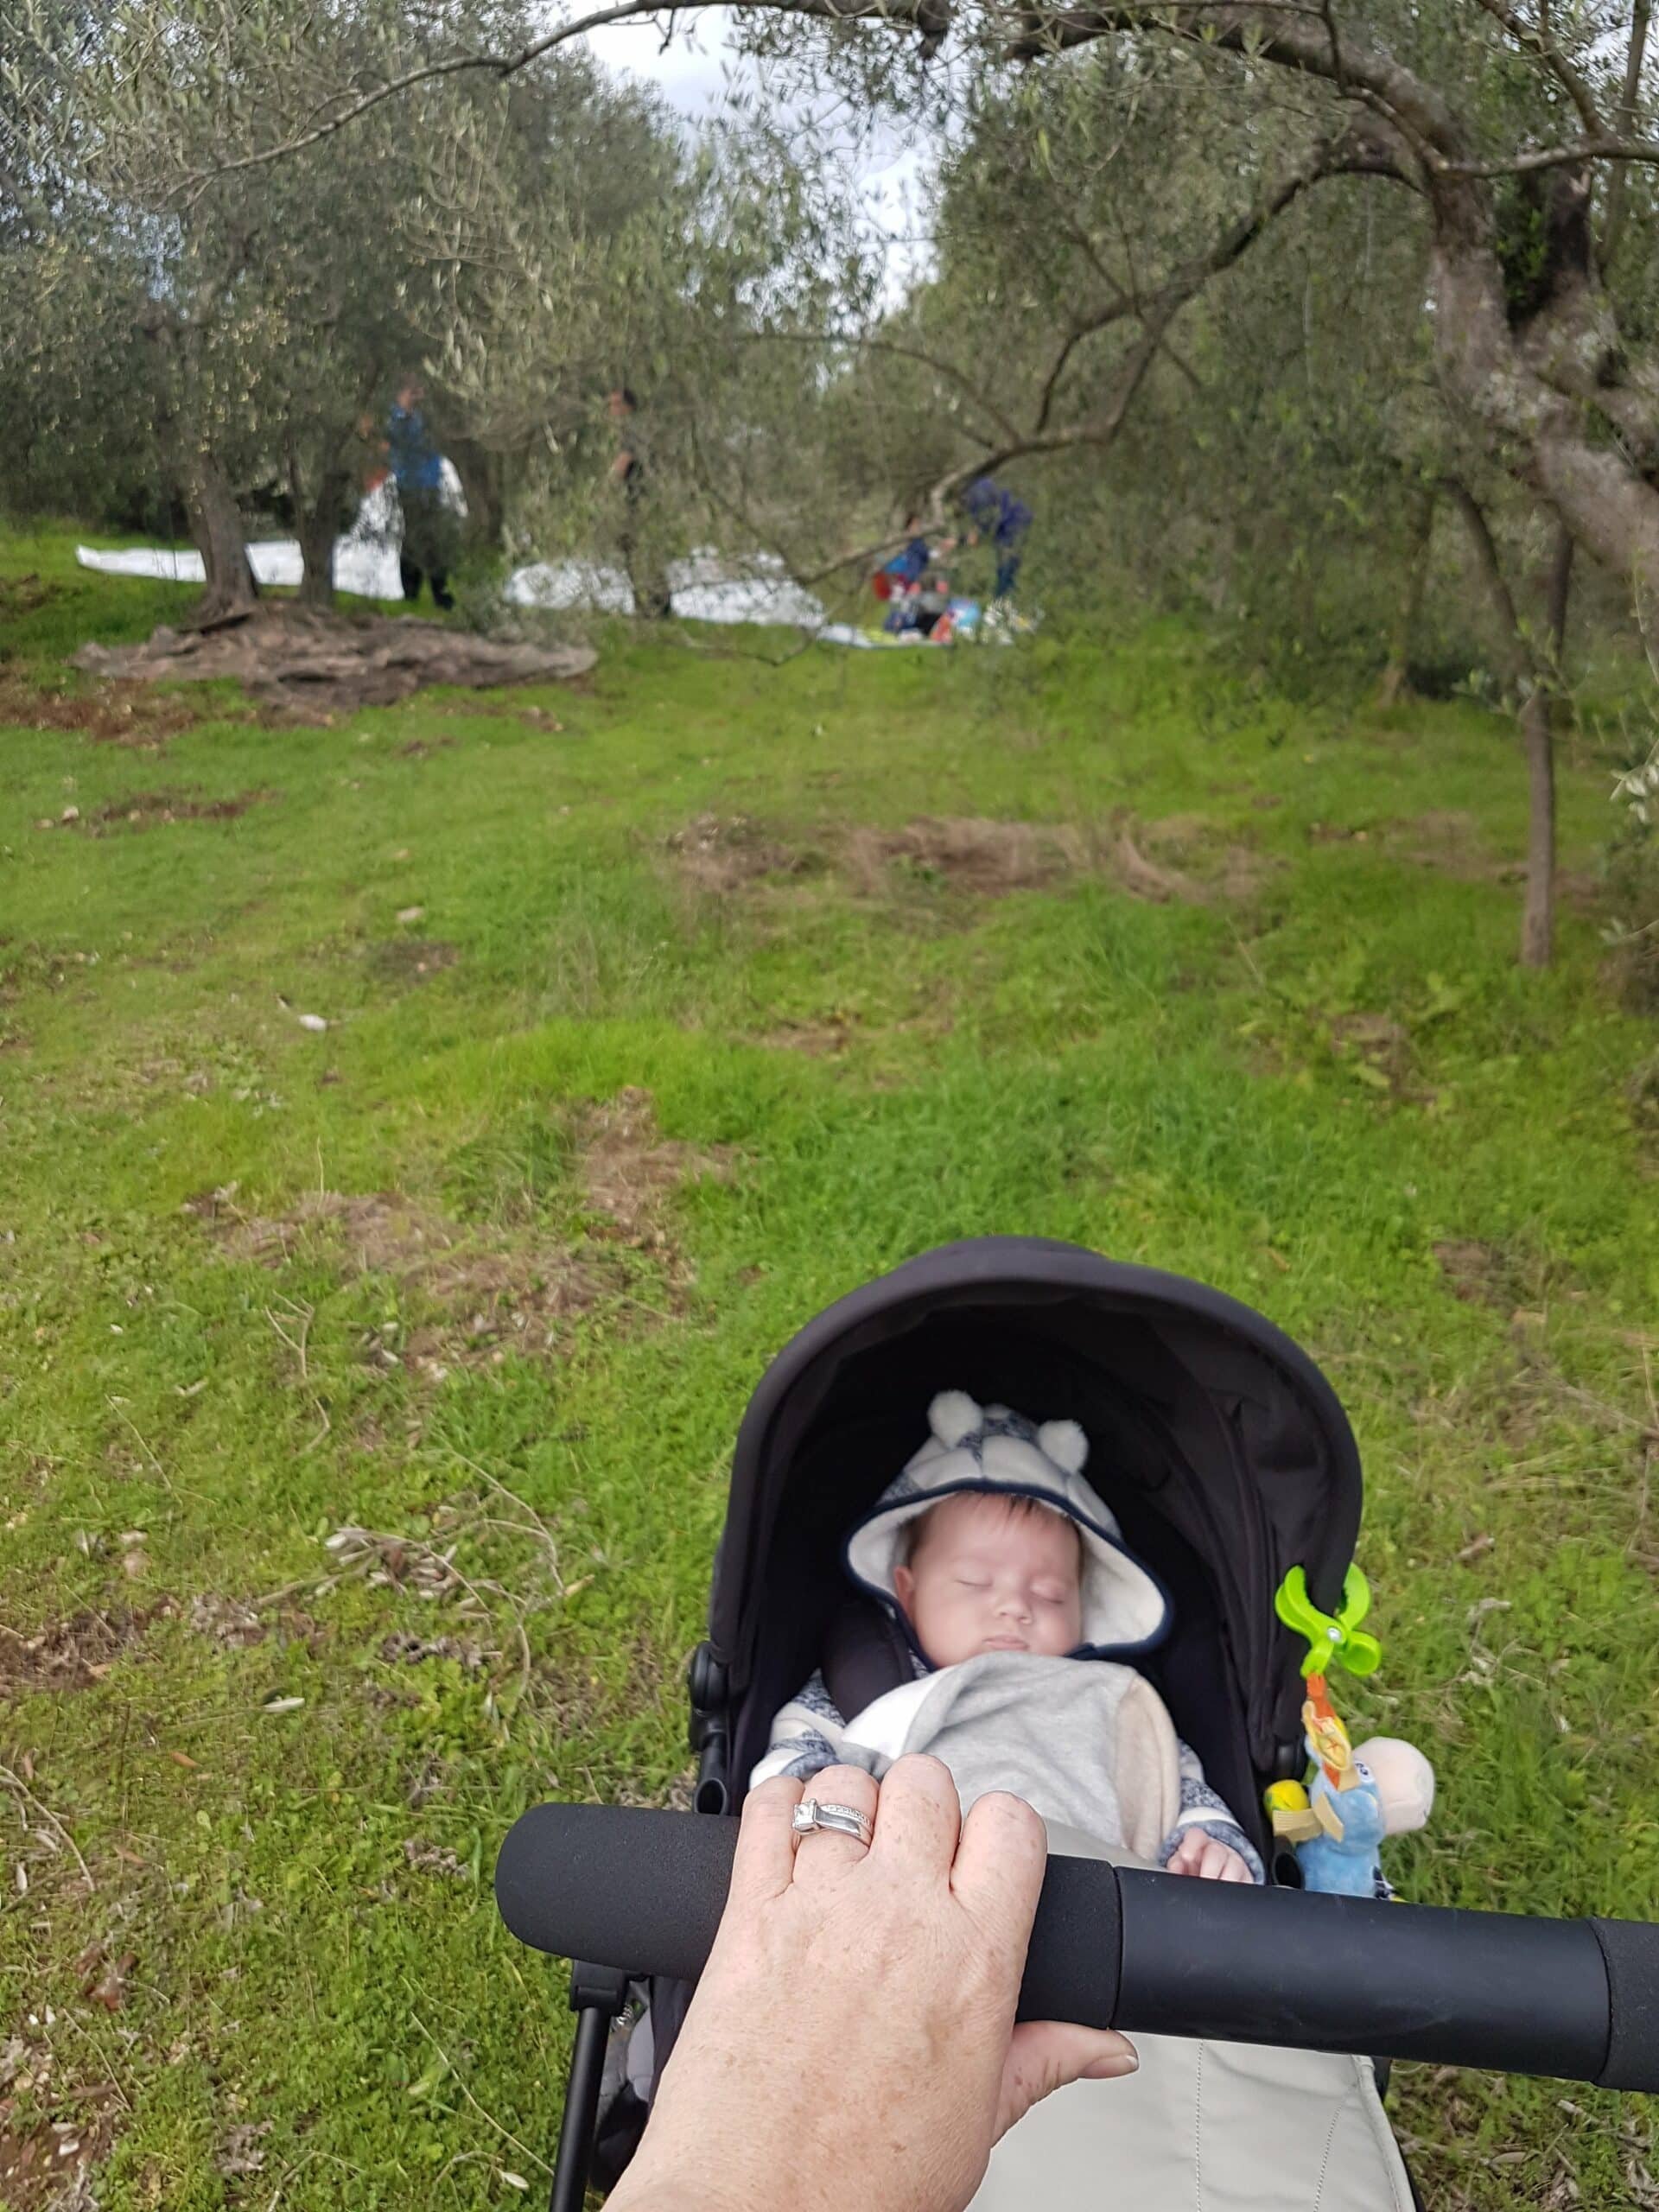 Roko in a travel stroller. Outdoors with people in the background at a park.